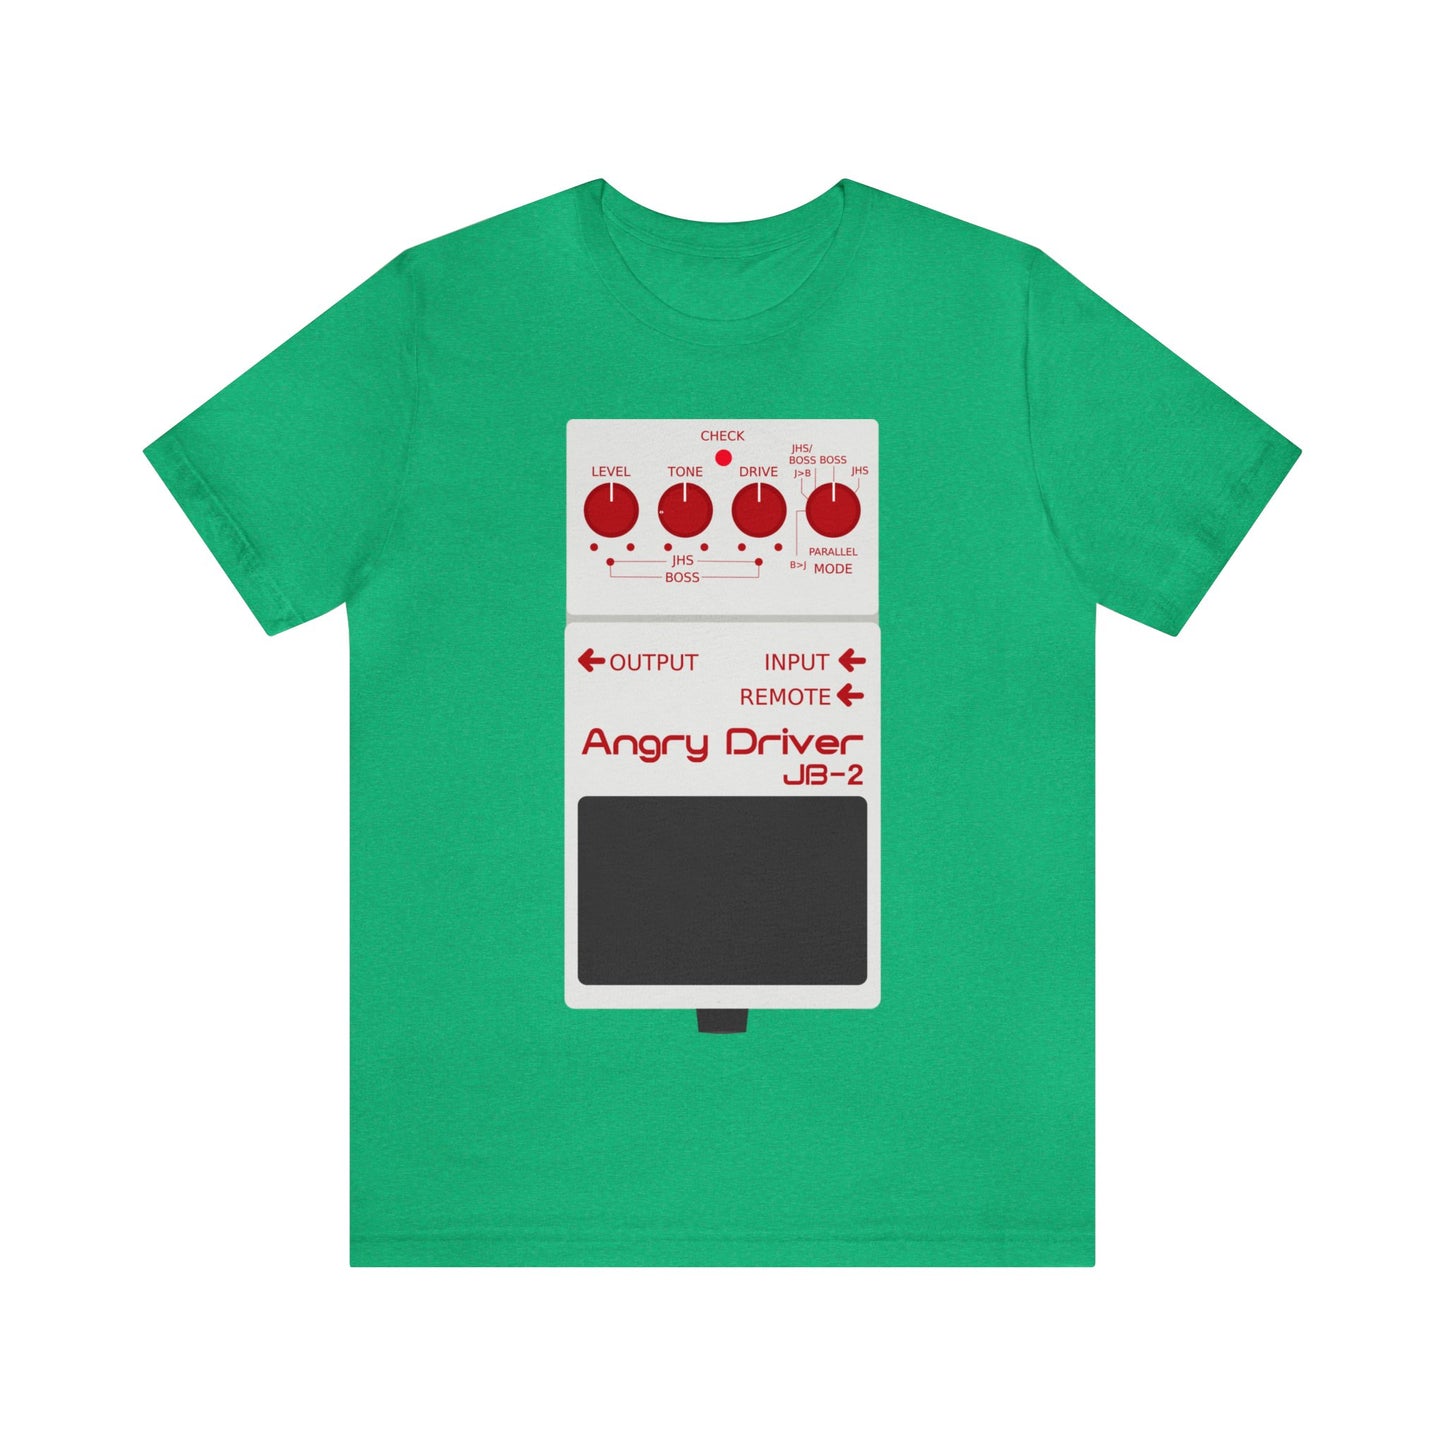 Boss Angry Driver JB-2 Guitar Effect Pedal T-Shirt